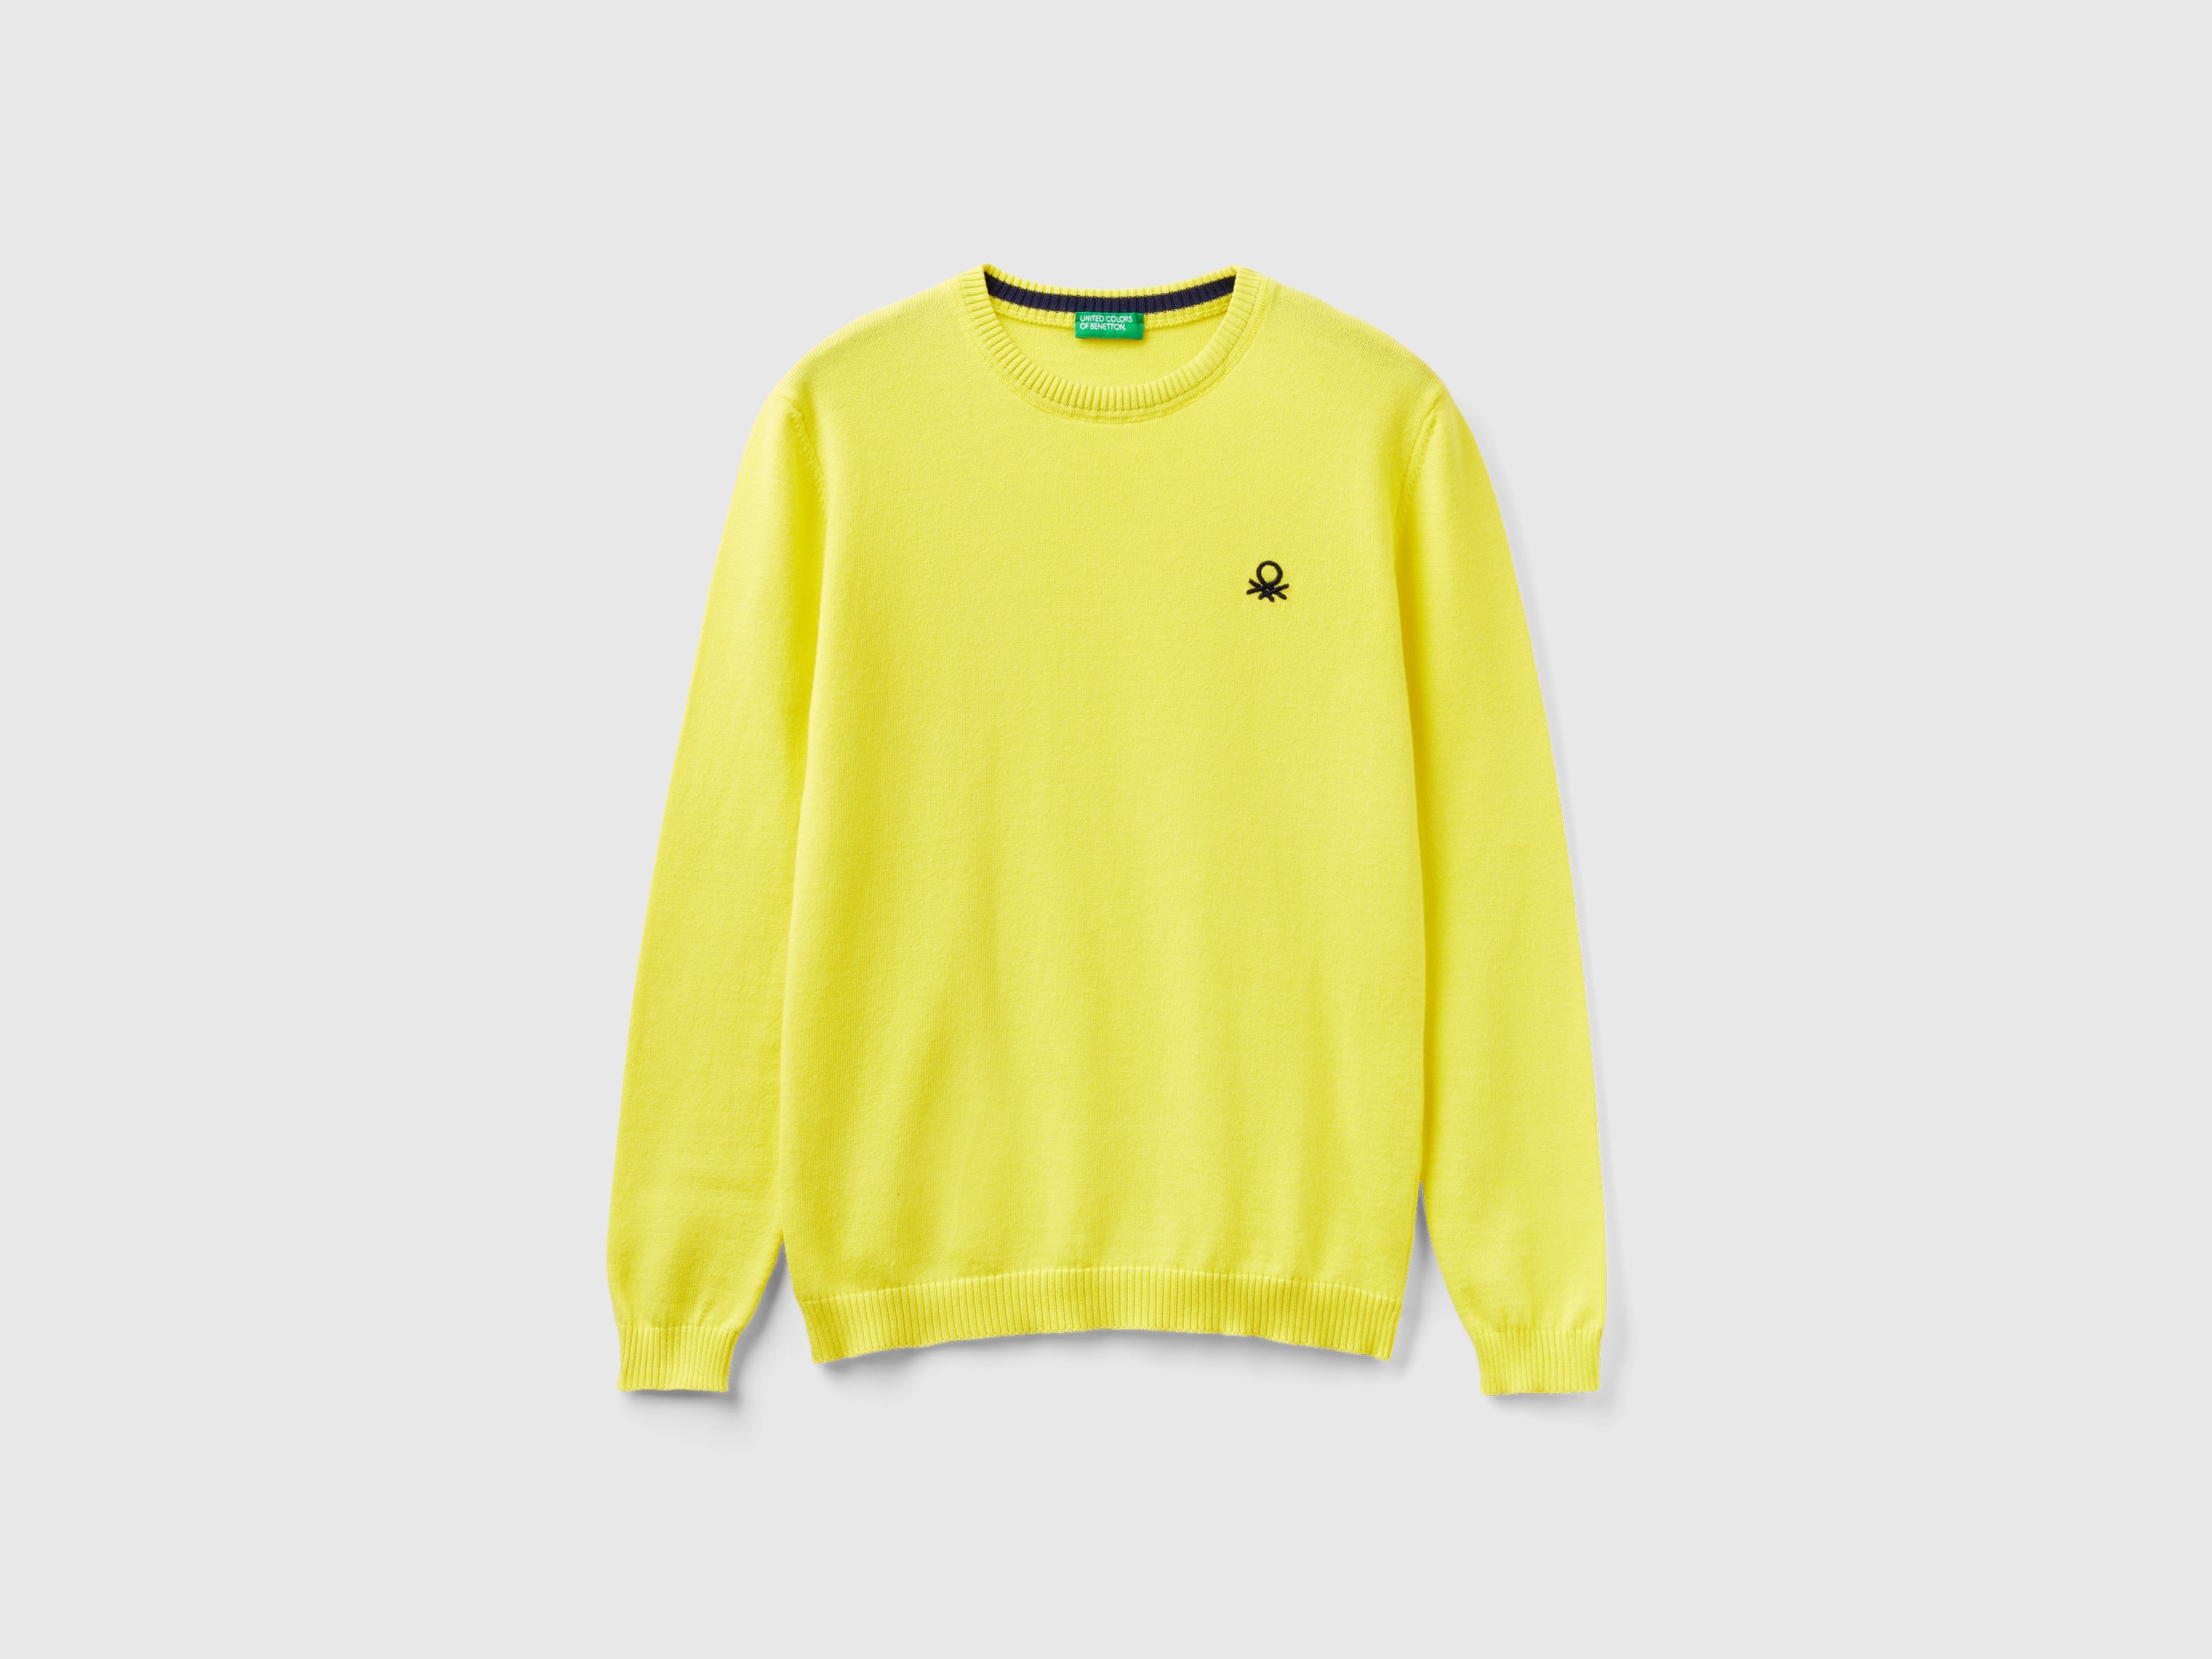 Benetton, Sweater In Pure Cotton With Logo, size M, Yellow, Kids